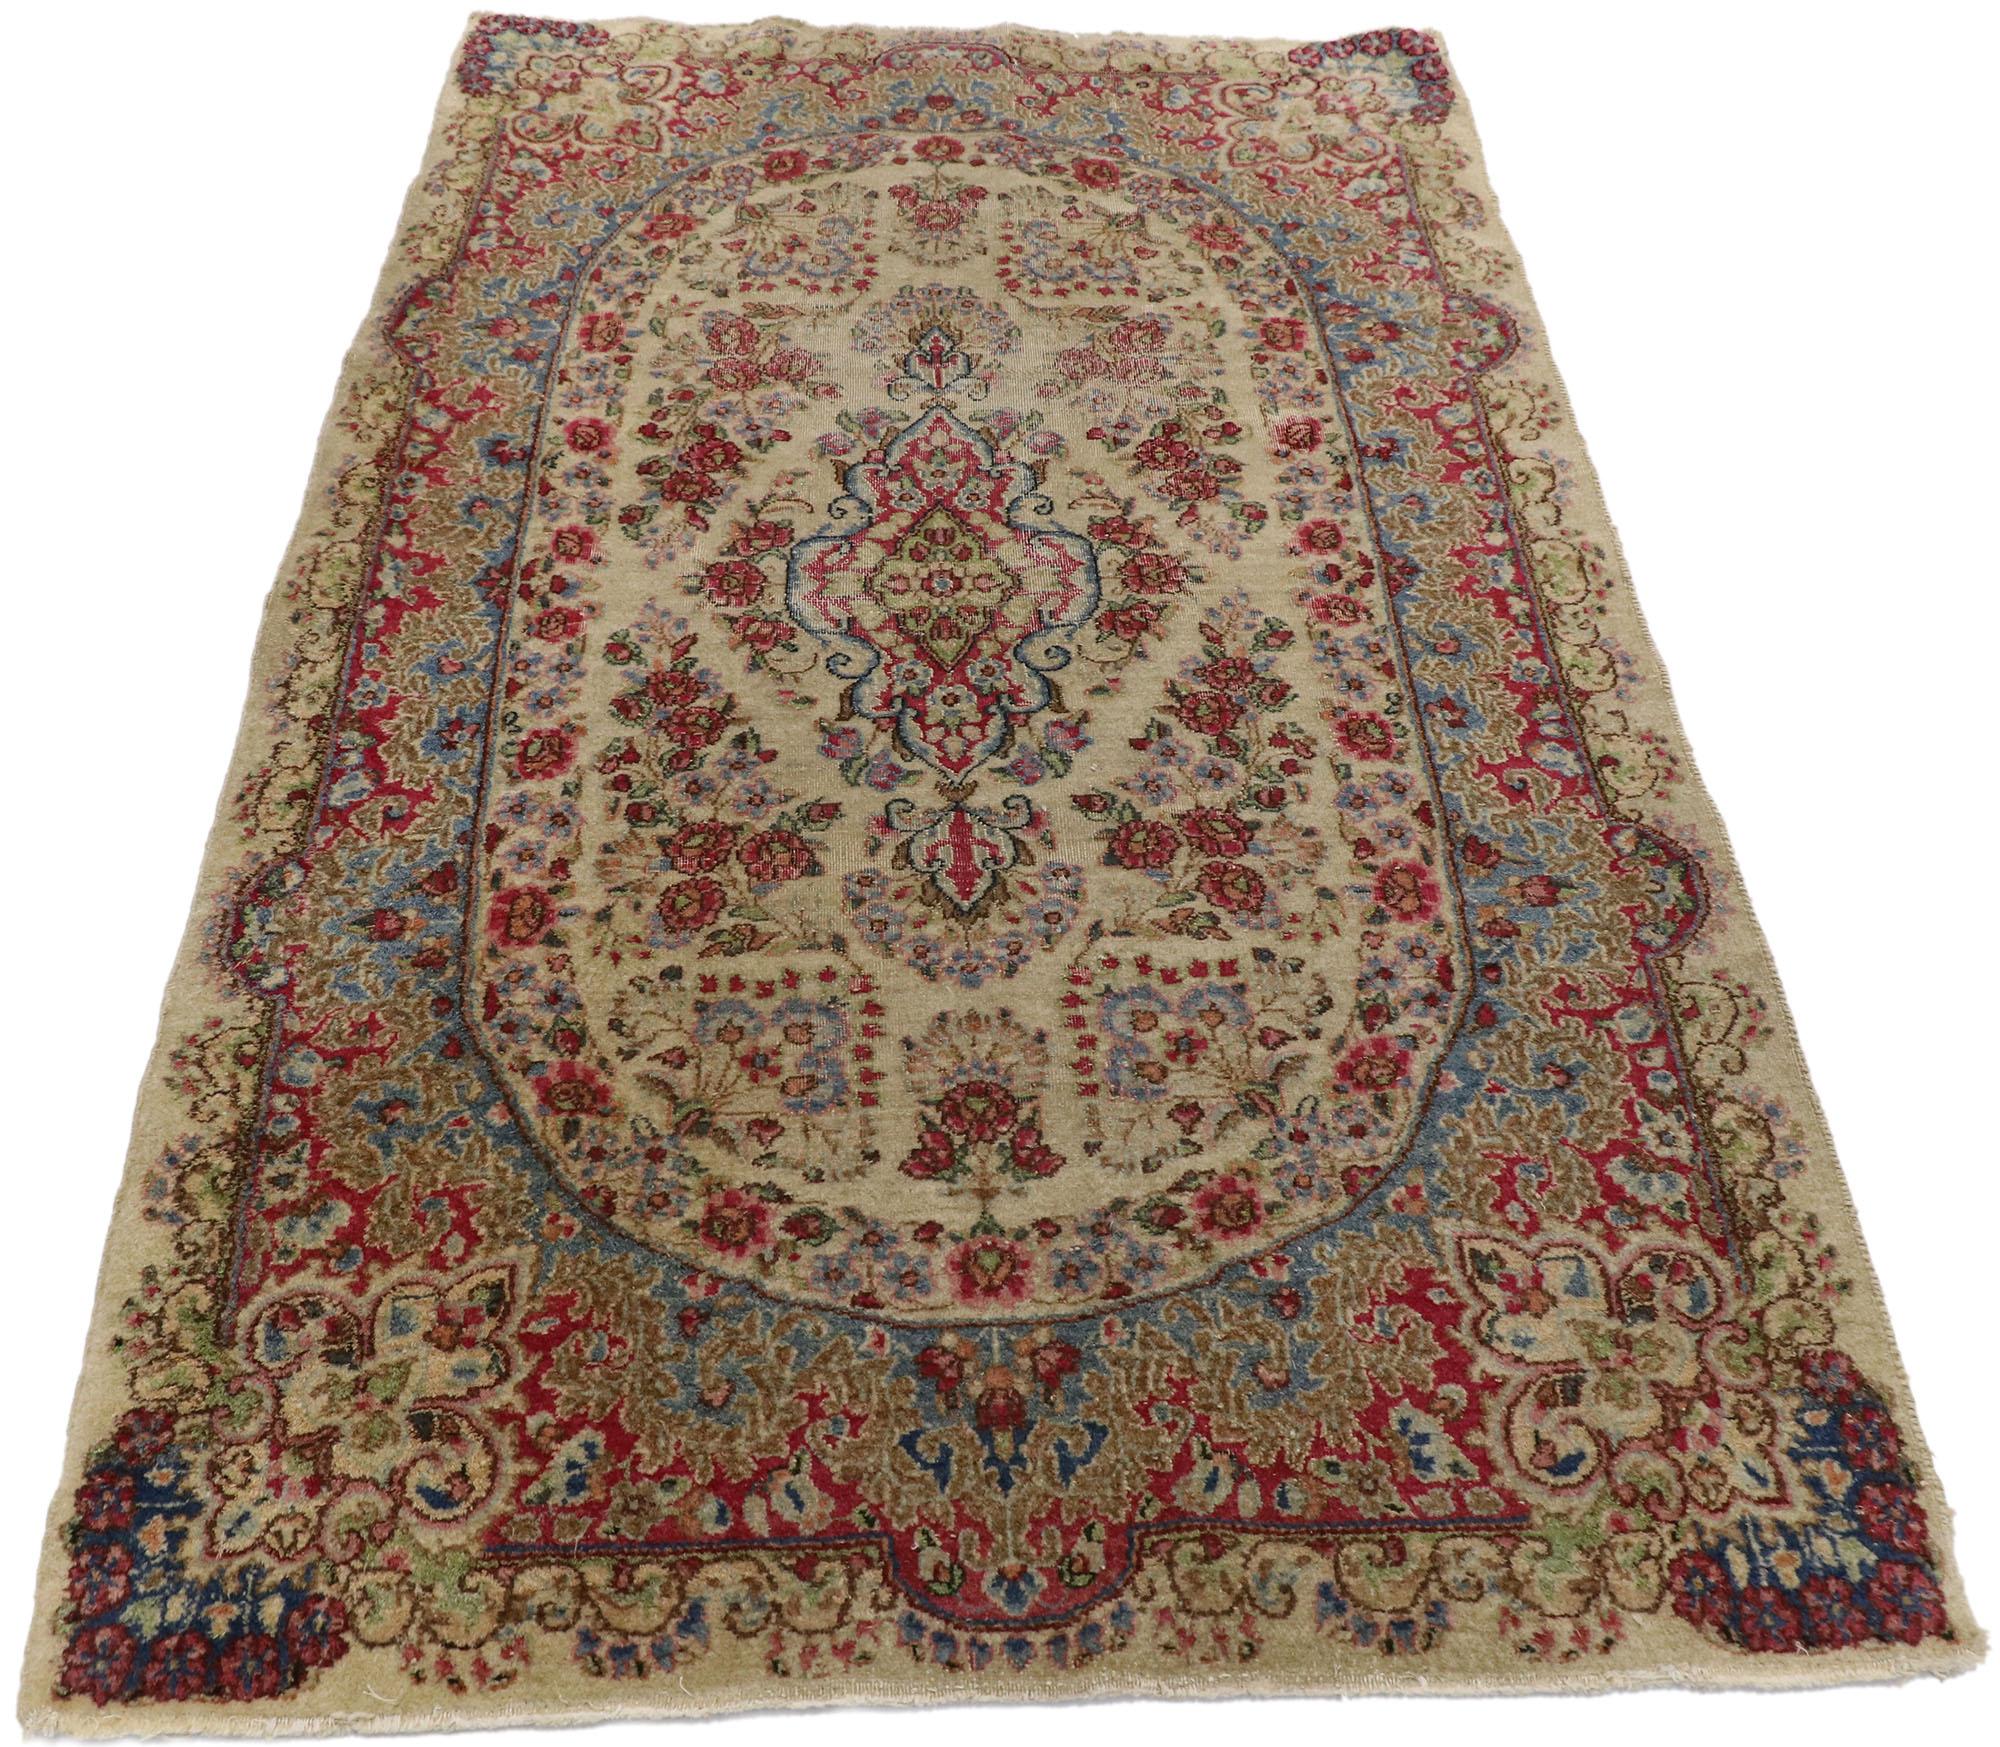 20th Century Distressed Antique Persian Kerman Rug with Shabby Chic Rustic French Style For Sale